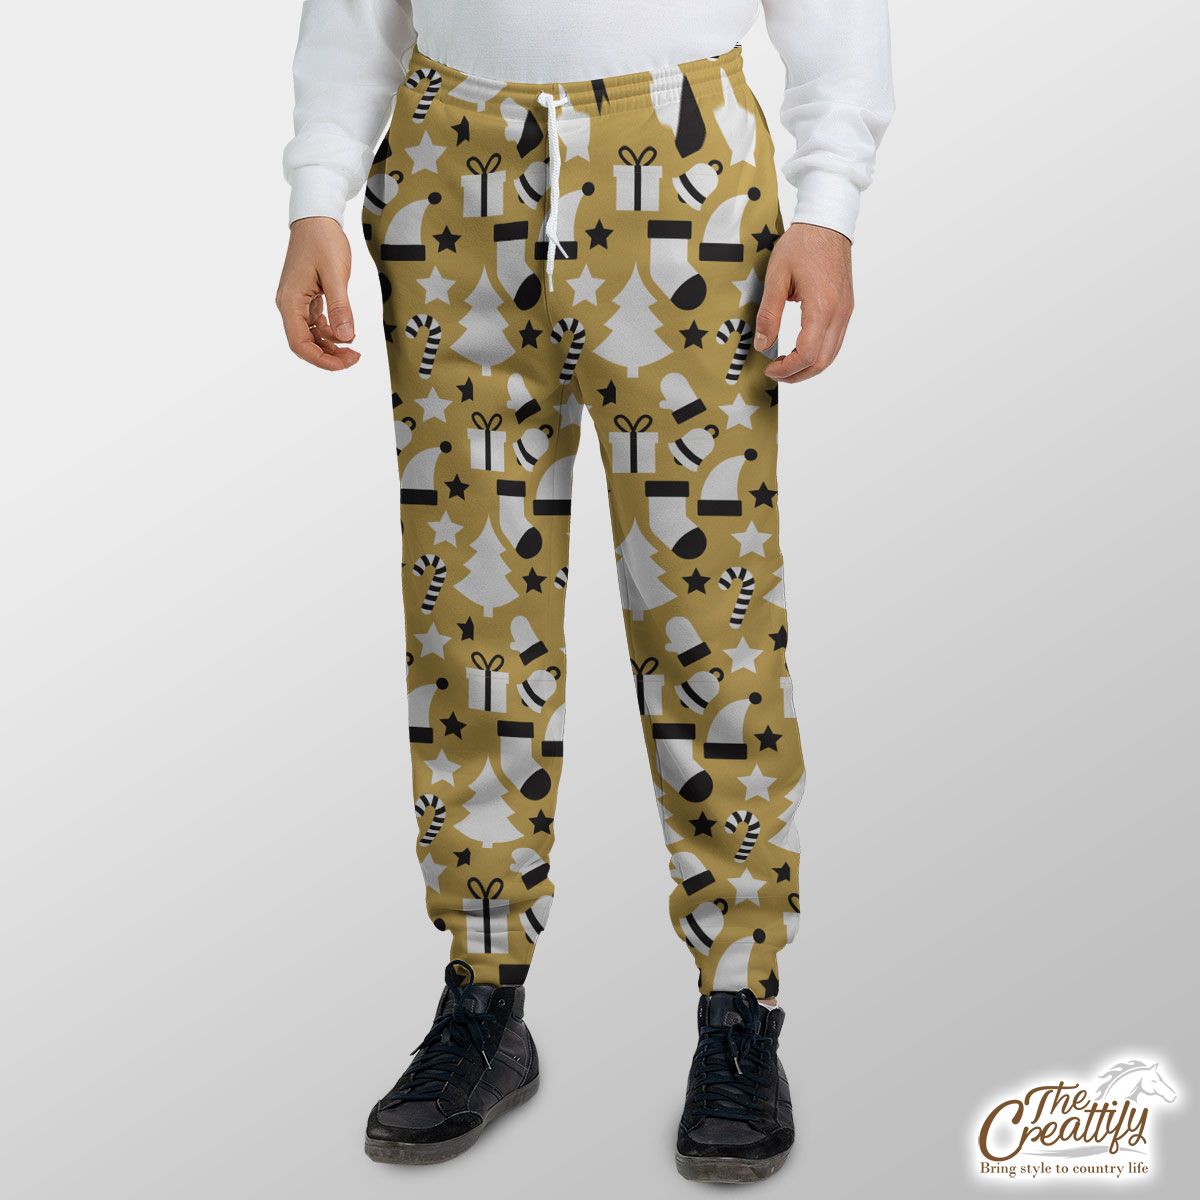 Black And White Christmas Socks, Christmas Tree, Candy Cane On Gold Background Sweatpants